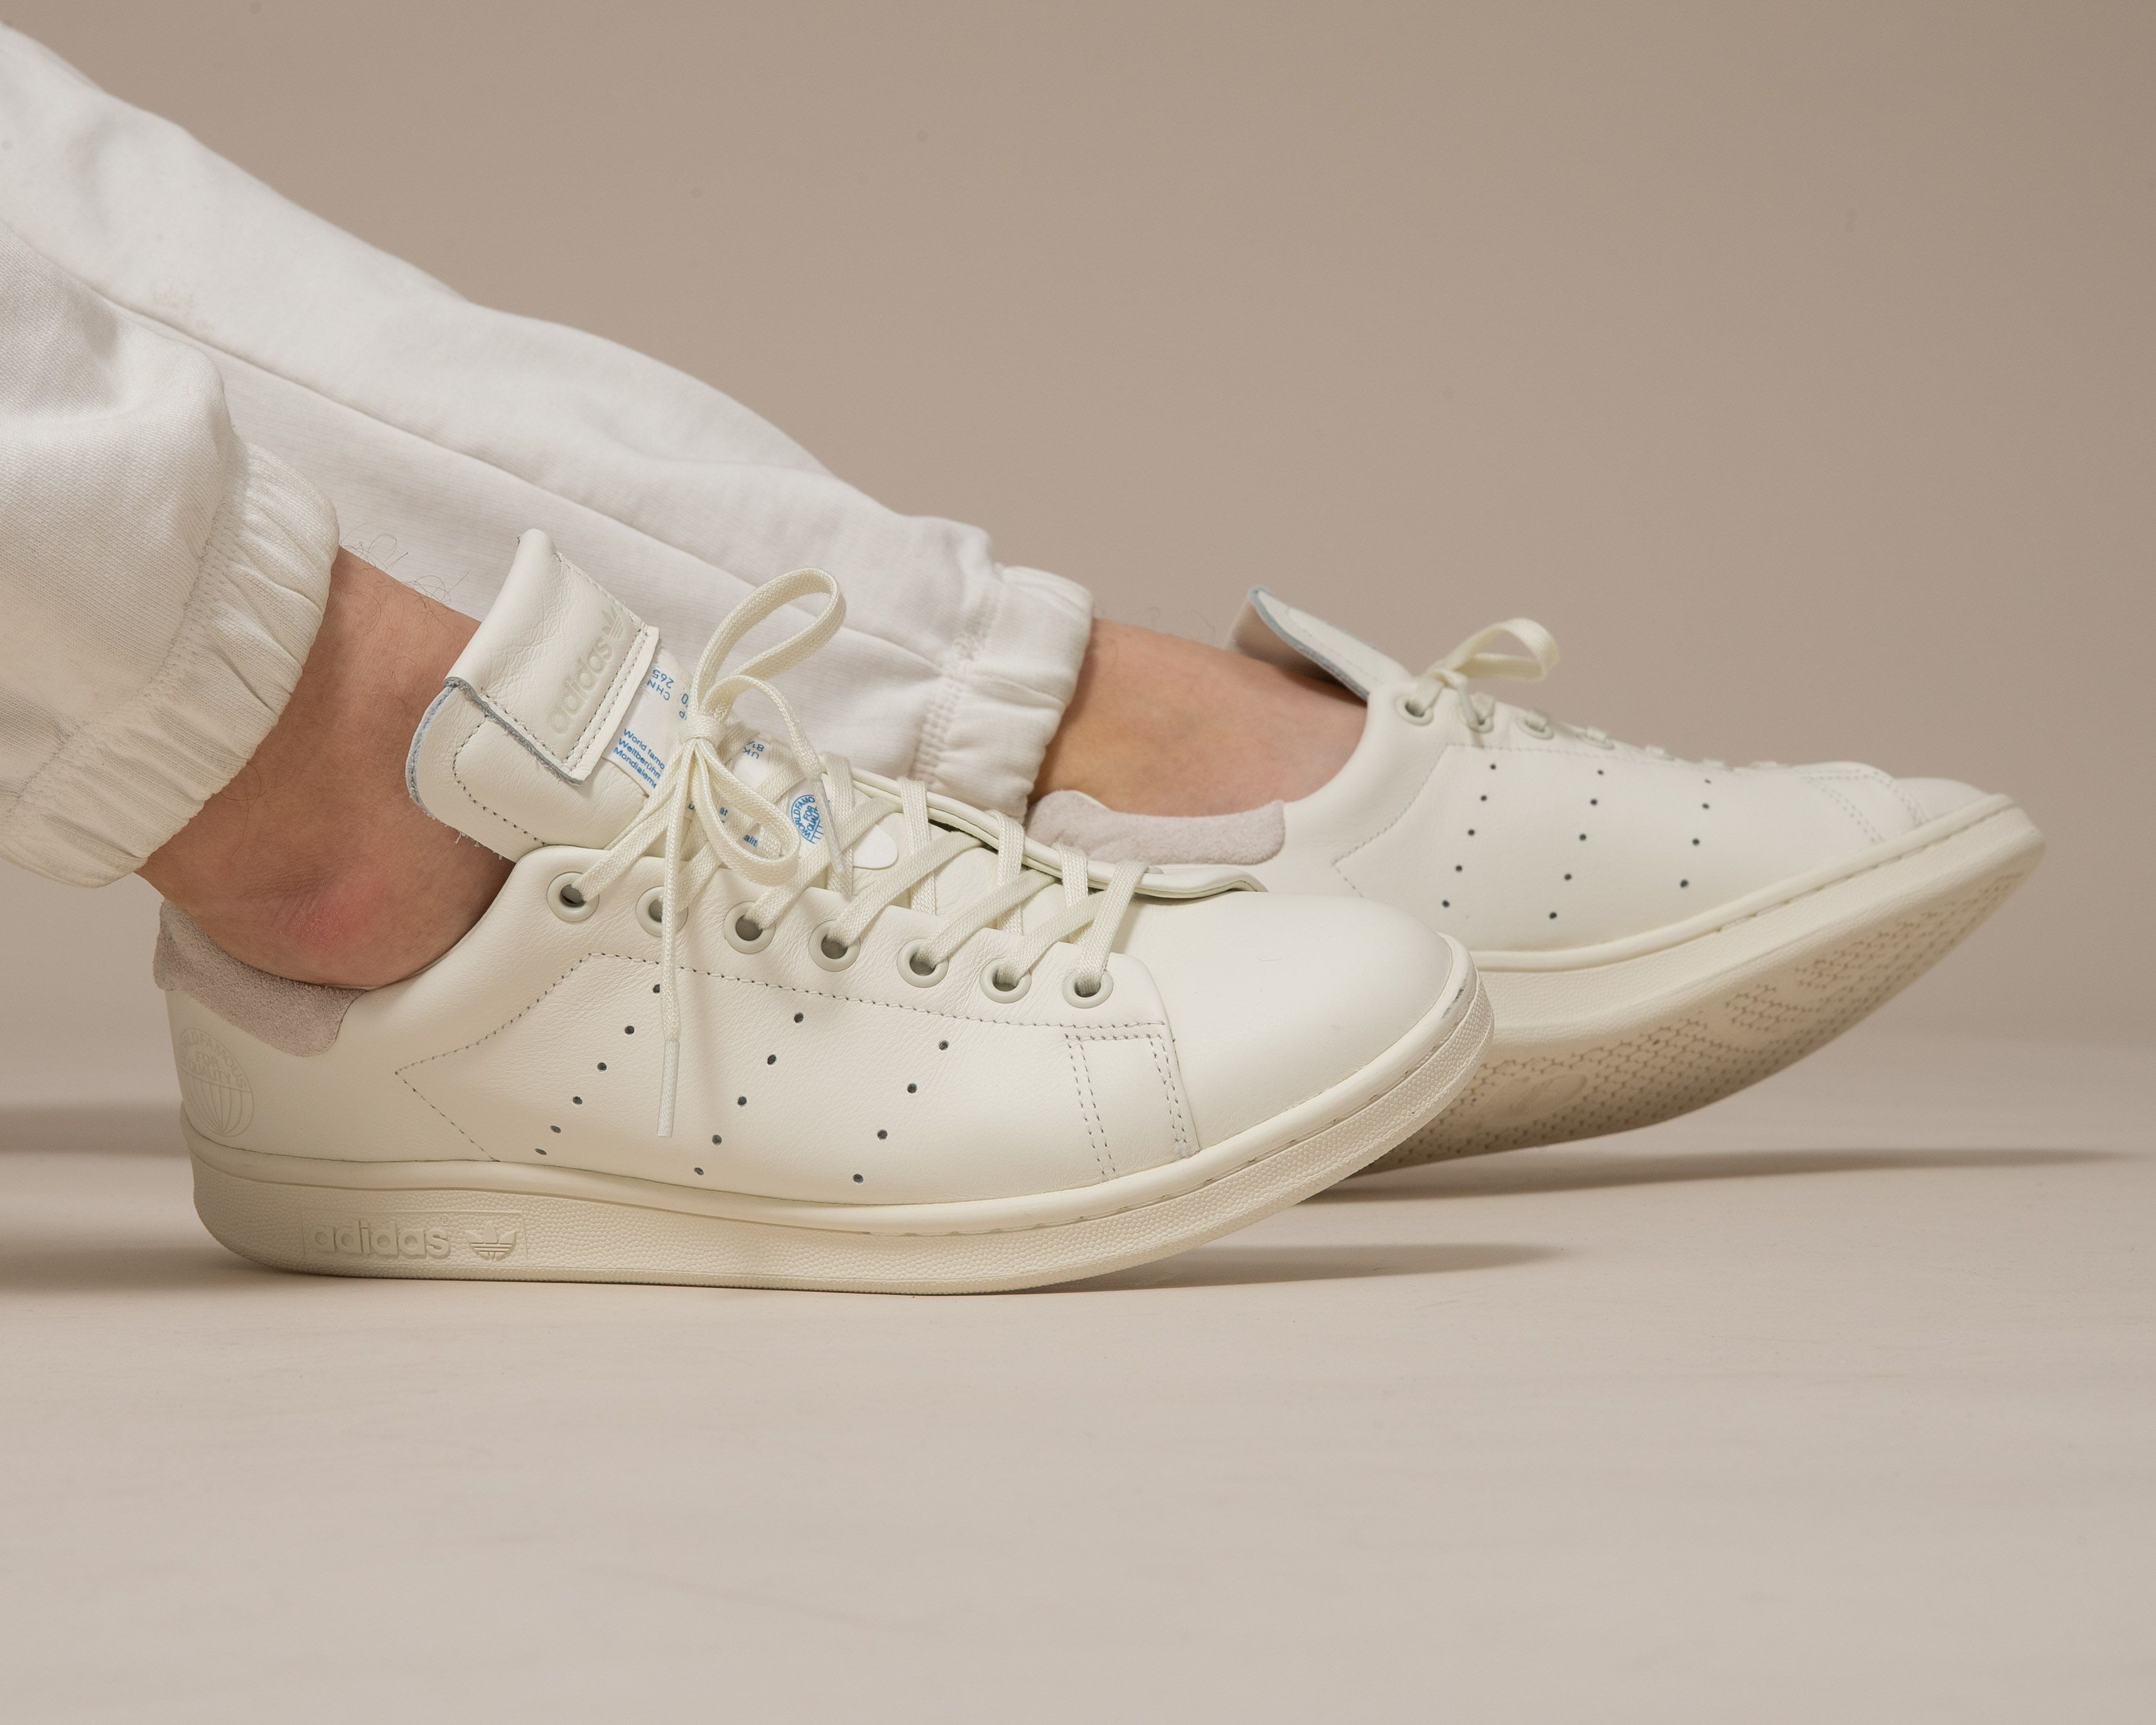 kijk in Email Leerling Twitter 上的 Titolo："adidas Stan Smith Recon "Off White" available online ➡️  https://t.co/ikNdGVTZMC UK 6.5 (40) - UK 11 (46) style code 🔎 EF4001 # adidas #stansmith #adidastsansmith #recon #offwhite #titolo #titoloshop  https://t.co/FQ5aDdSfJN" /